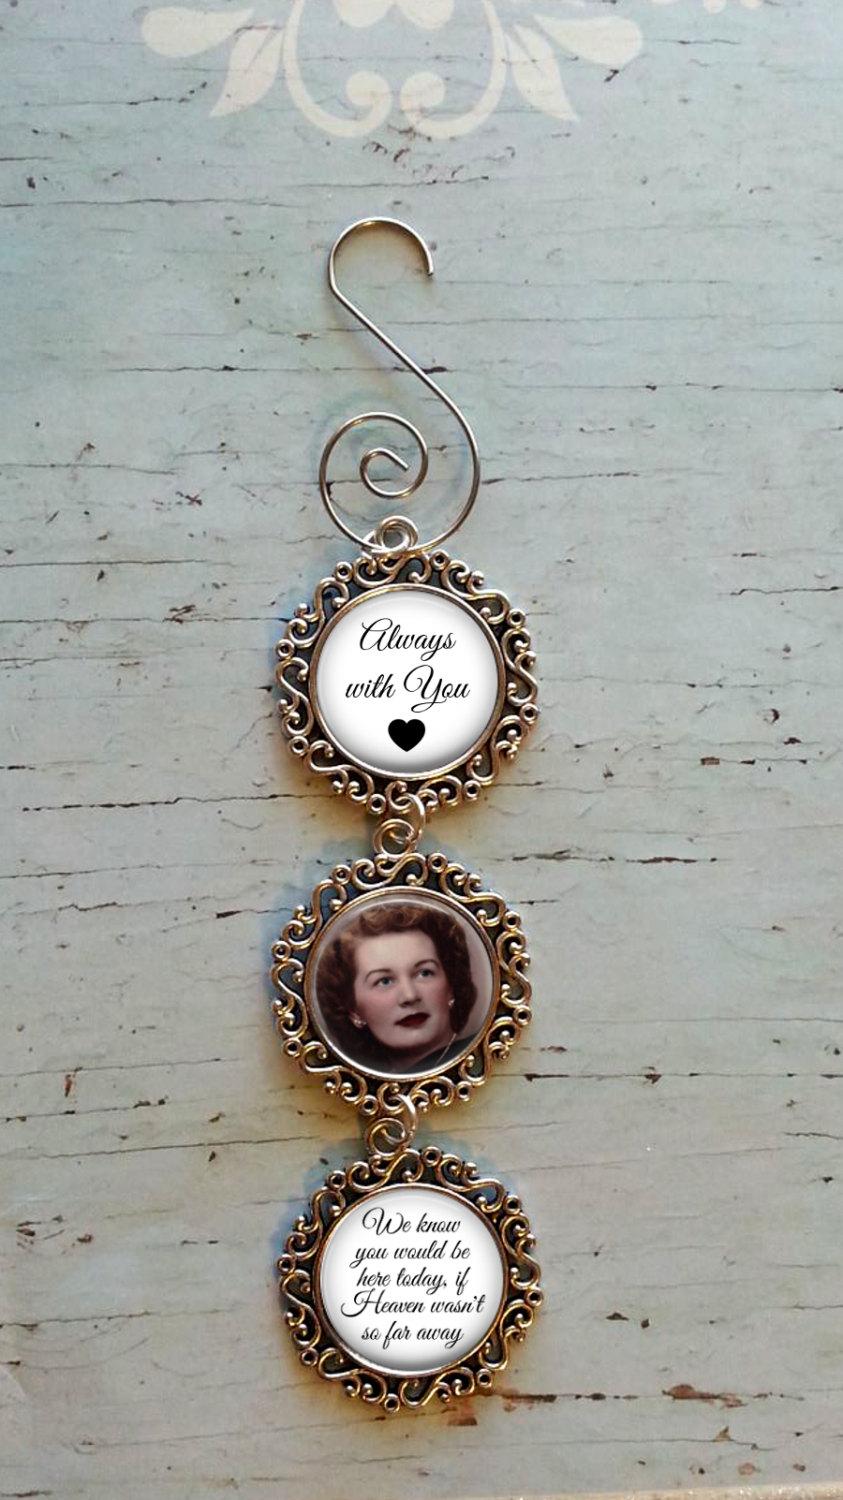 Mariage - SALE - Thru Midnight 12/16! Memorial Ornament Personalized with Photo - Christmas Ornament